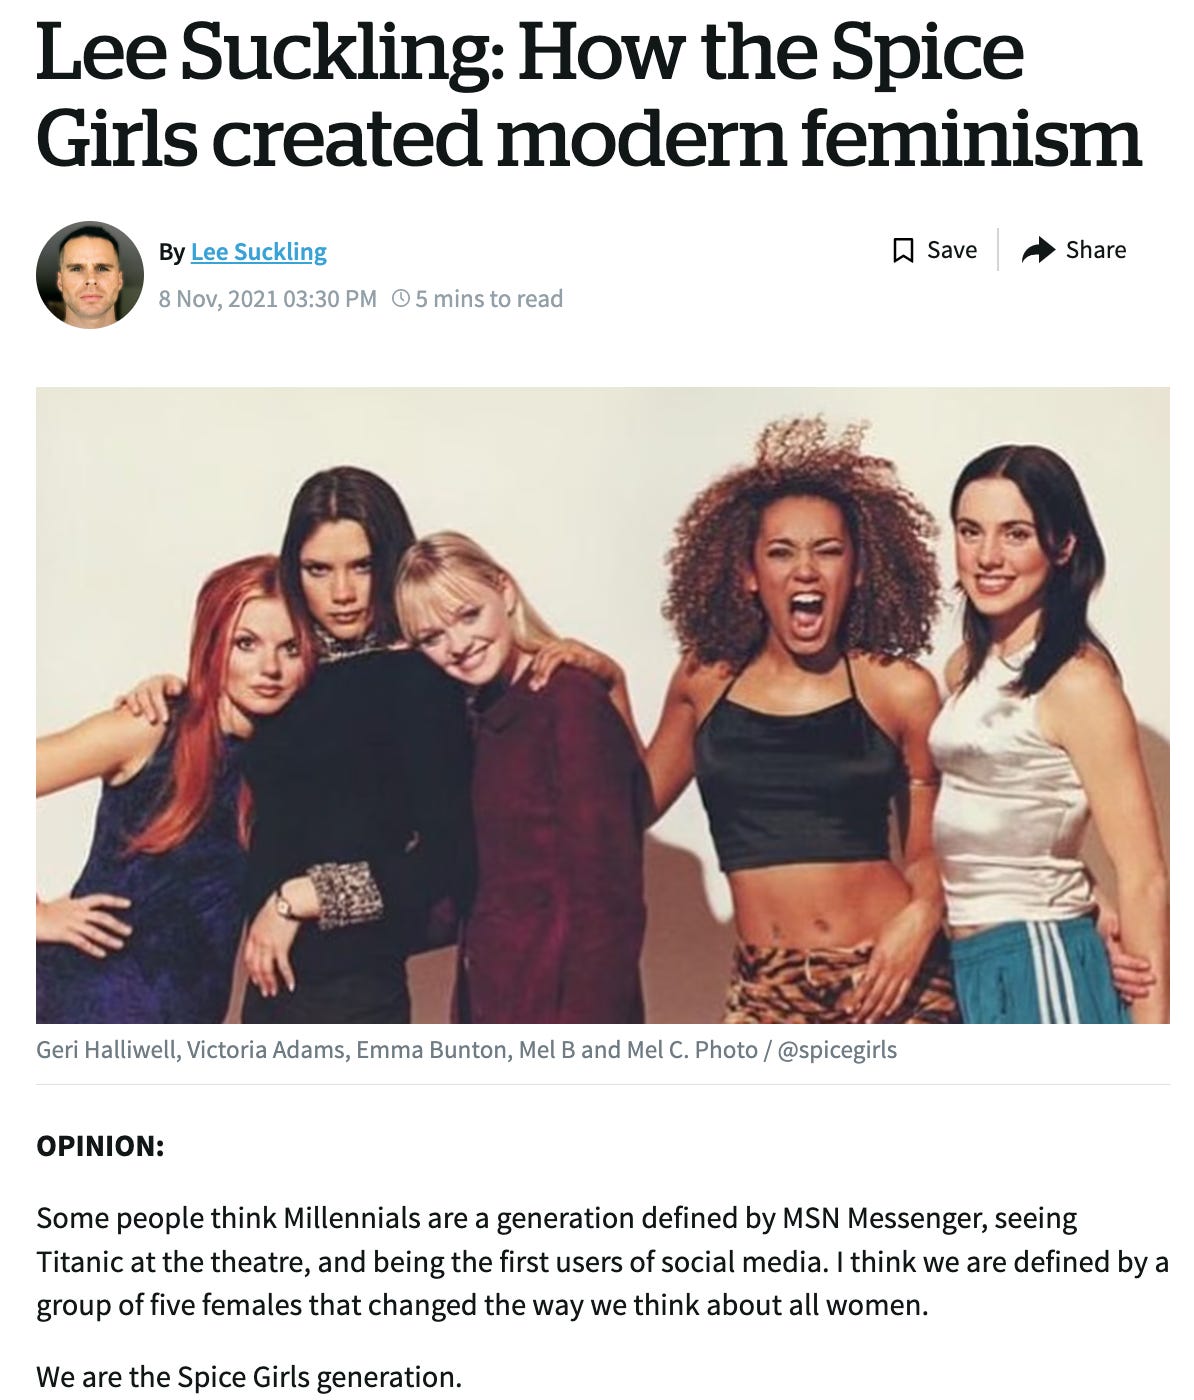 Screenshot of an opinion article called "How the Spice Girls Created Modern Feminism"